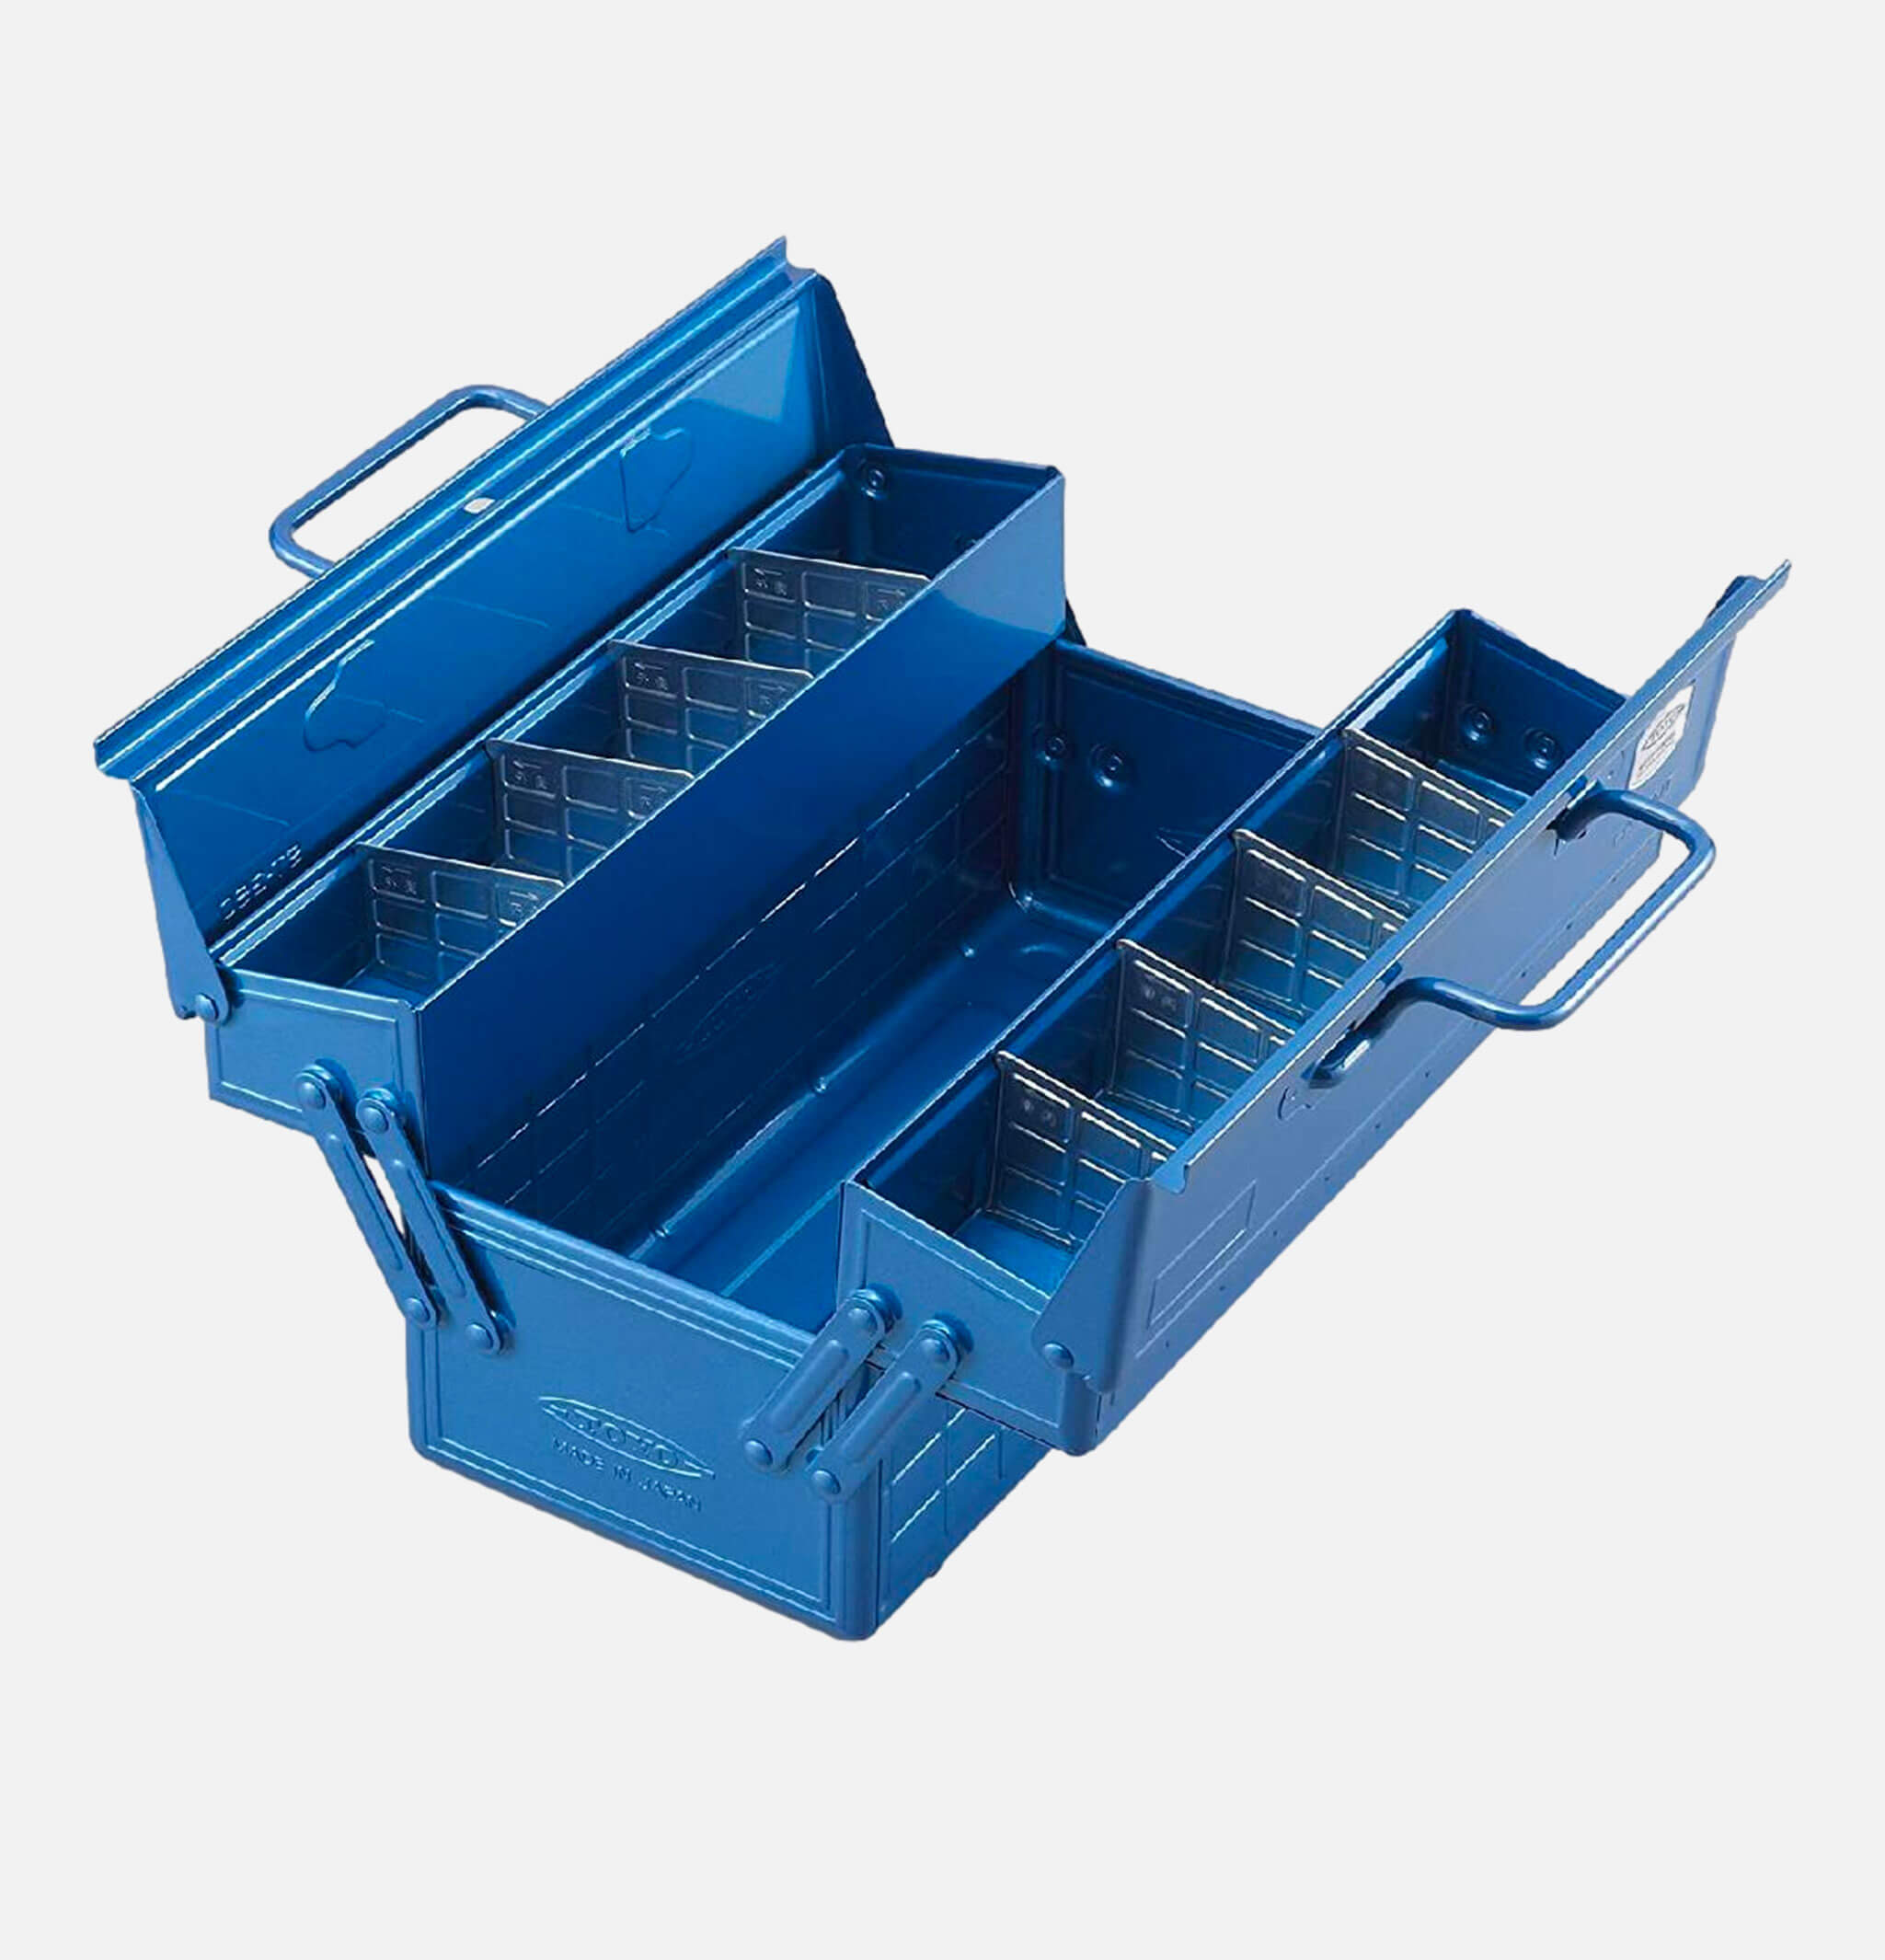 Toyo Steel Boite A Outils St 350 Blue